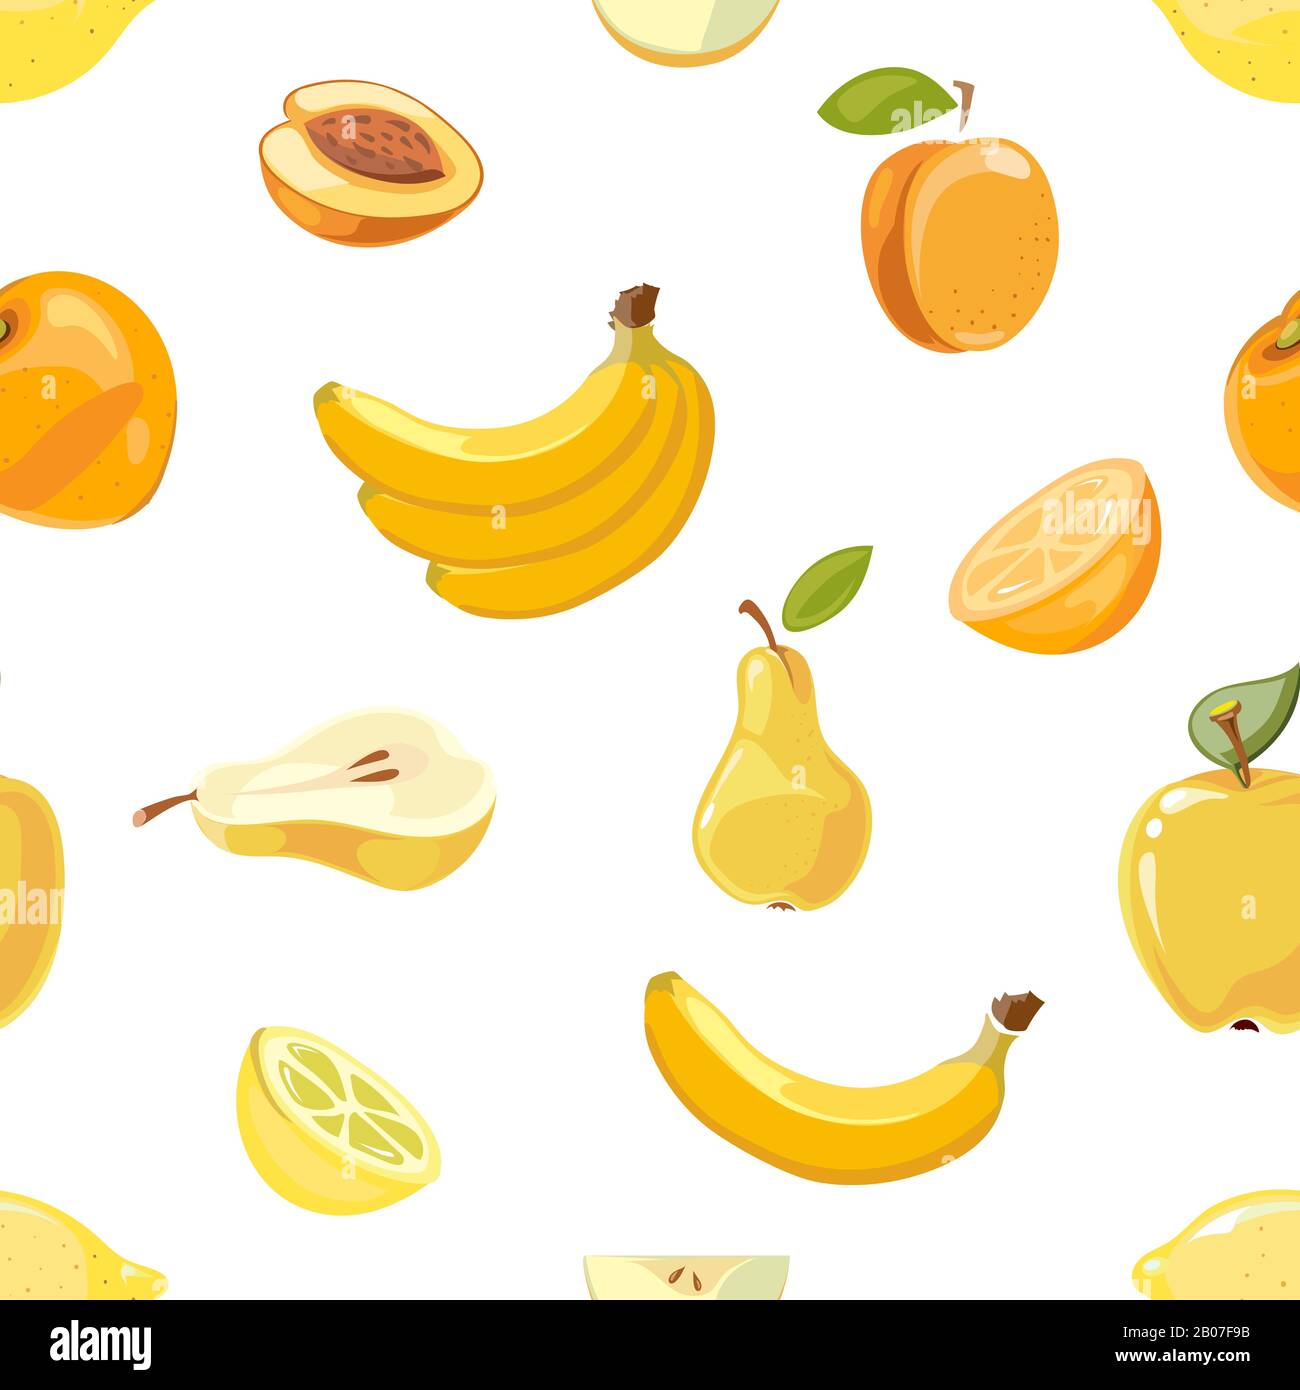 Yellow fruits seamless pattern over white background. Banana pear and orange. Vector illustration Stock Vector